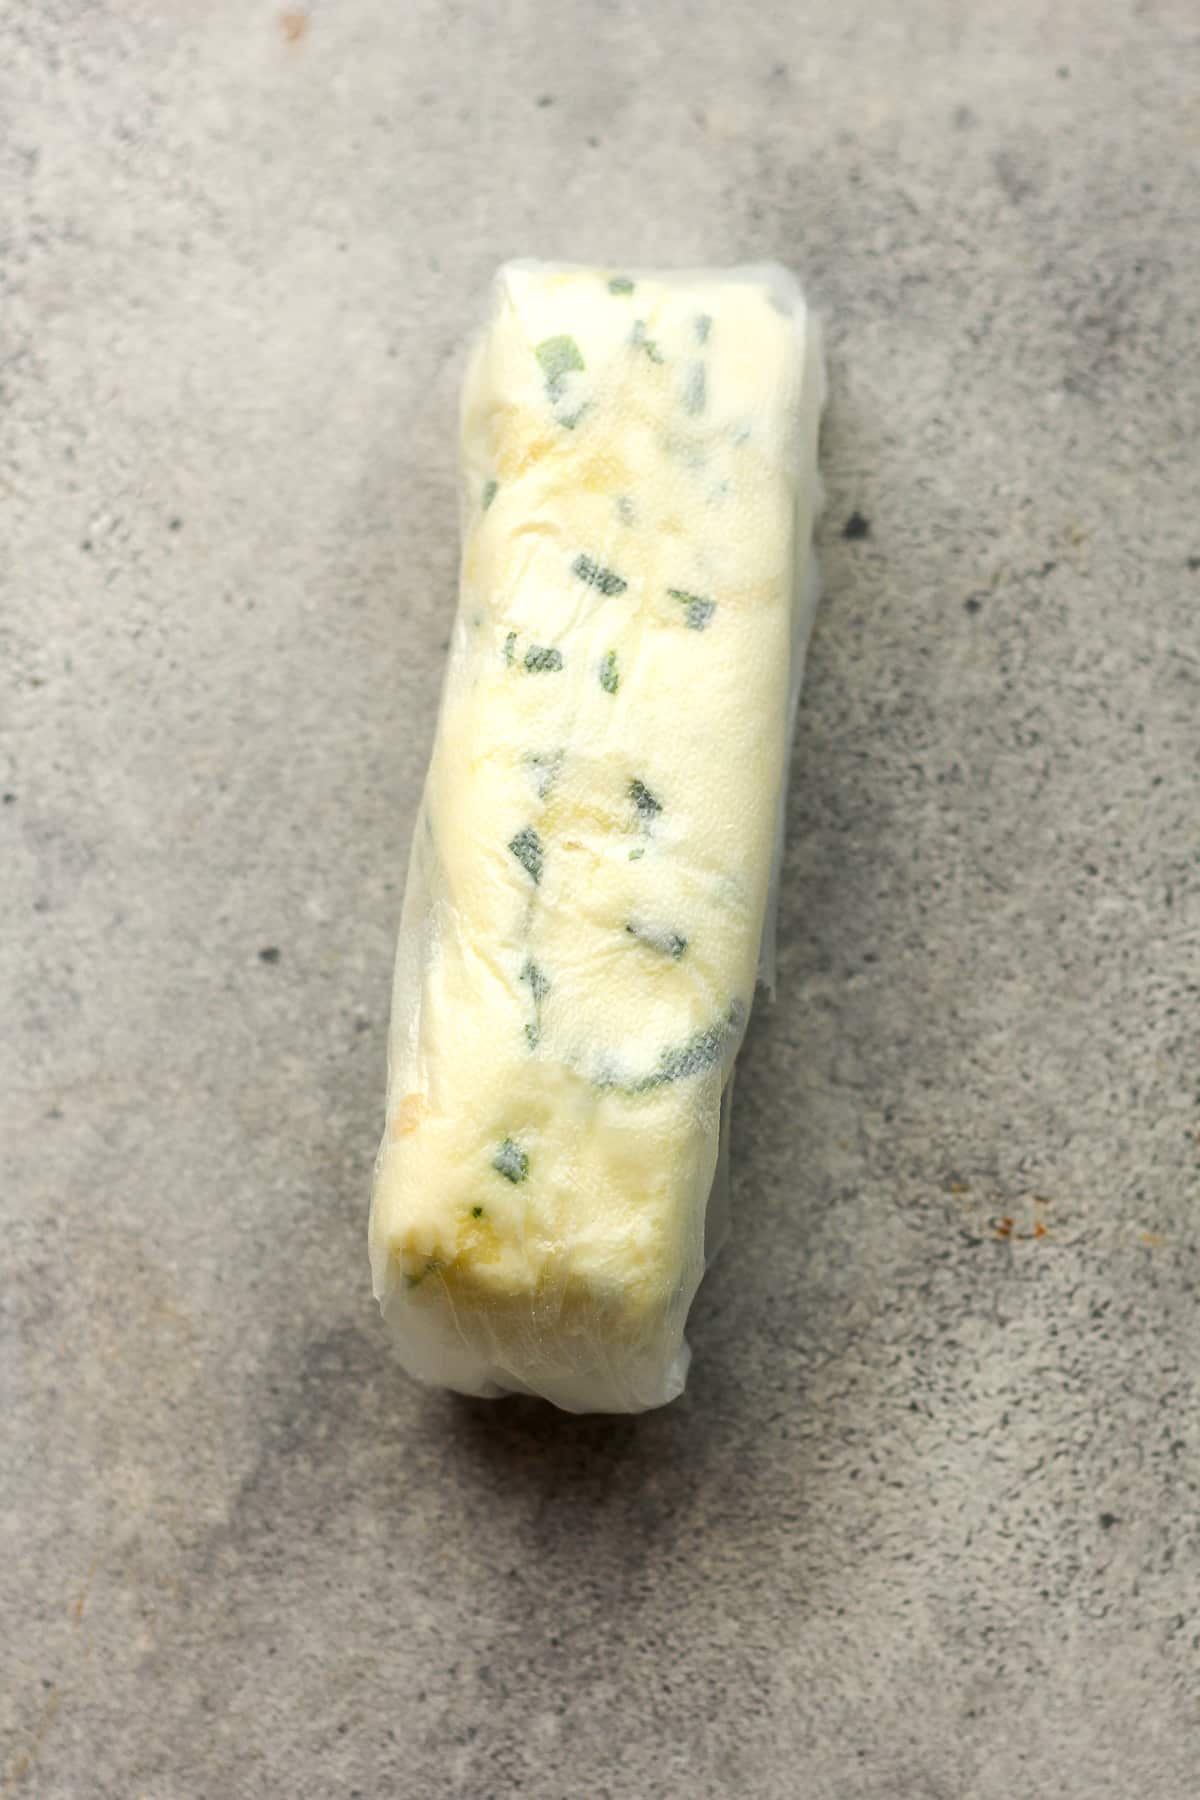 A log of garlic butter with chives wrapped in cling wrap.